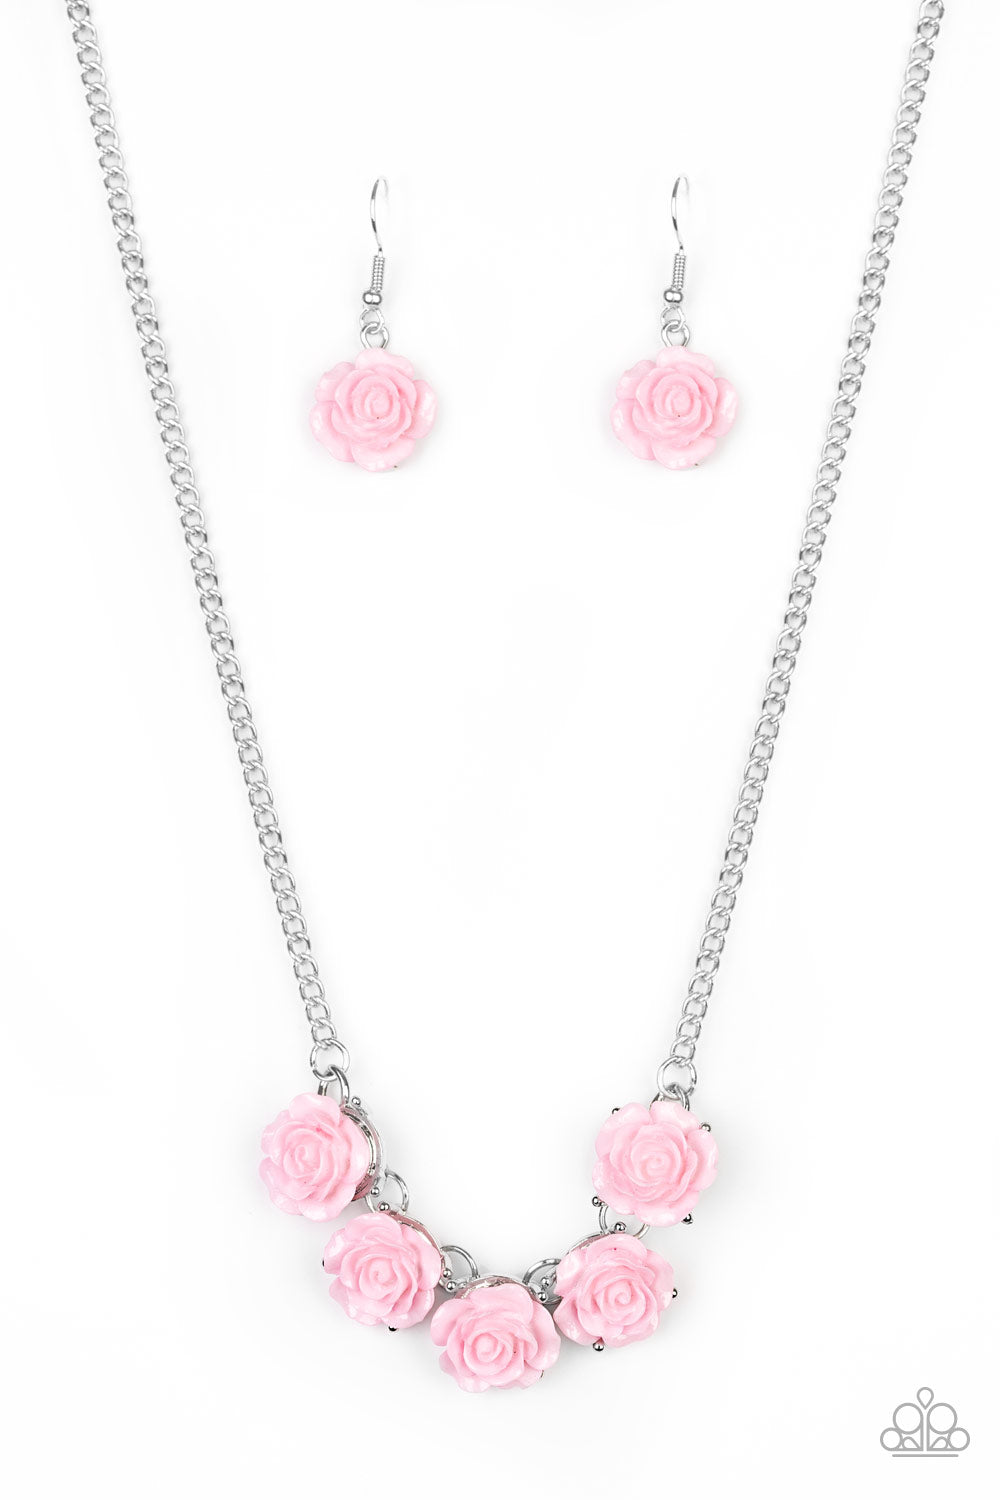 Garden Party Posh - Pink Necklace